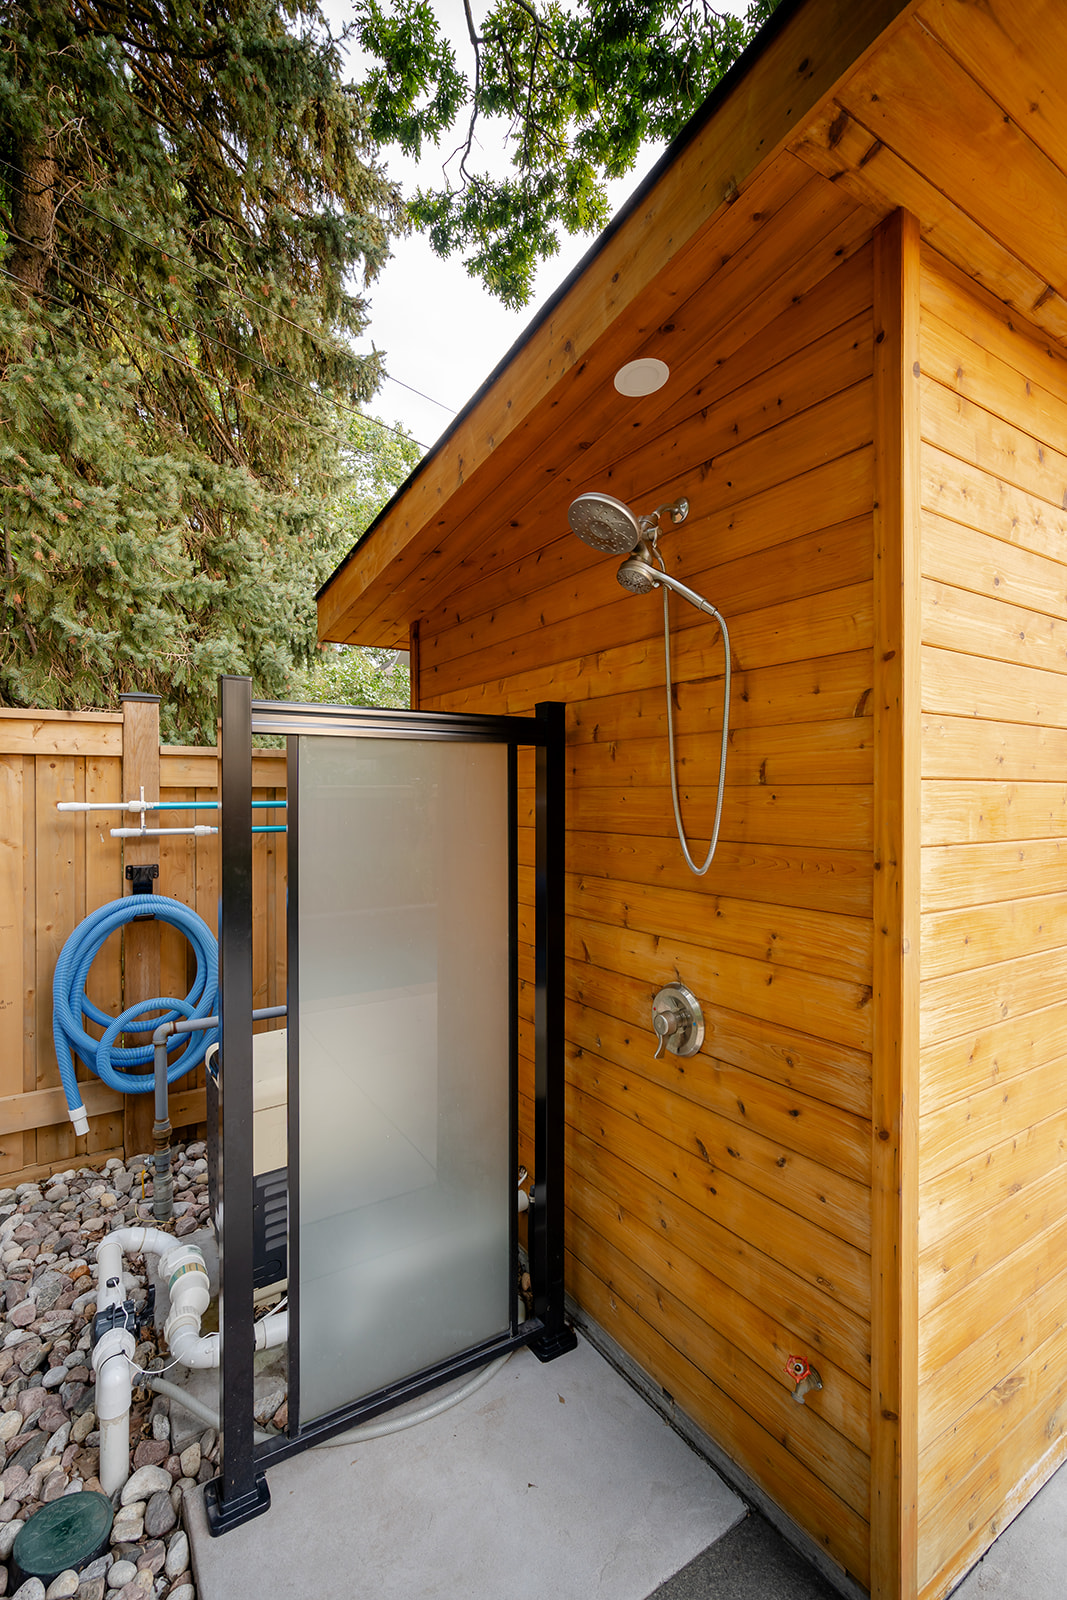 An outdoor shower on the side of the pool house.